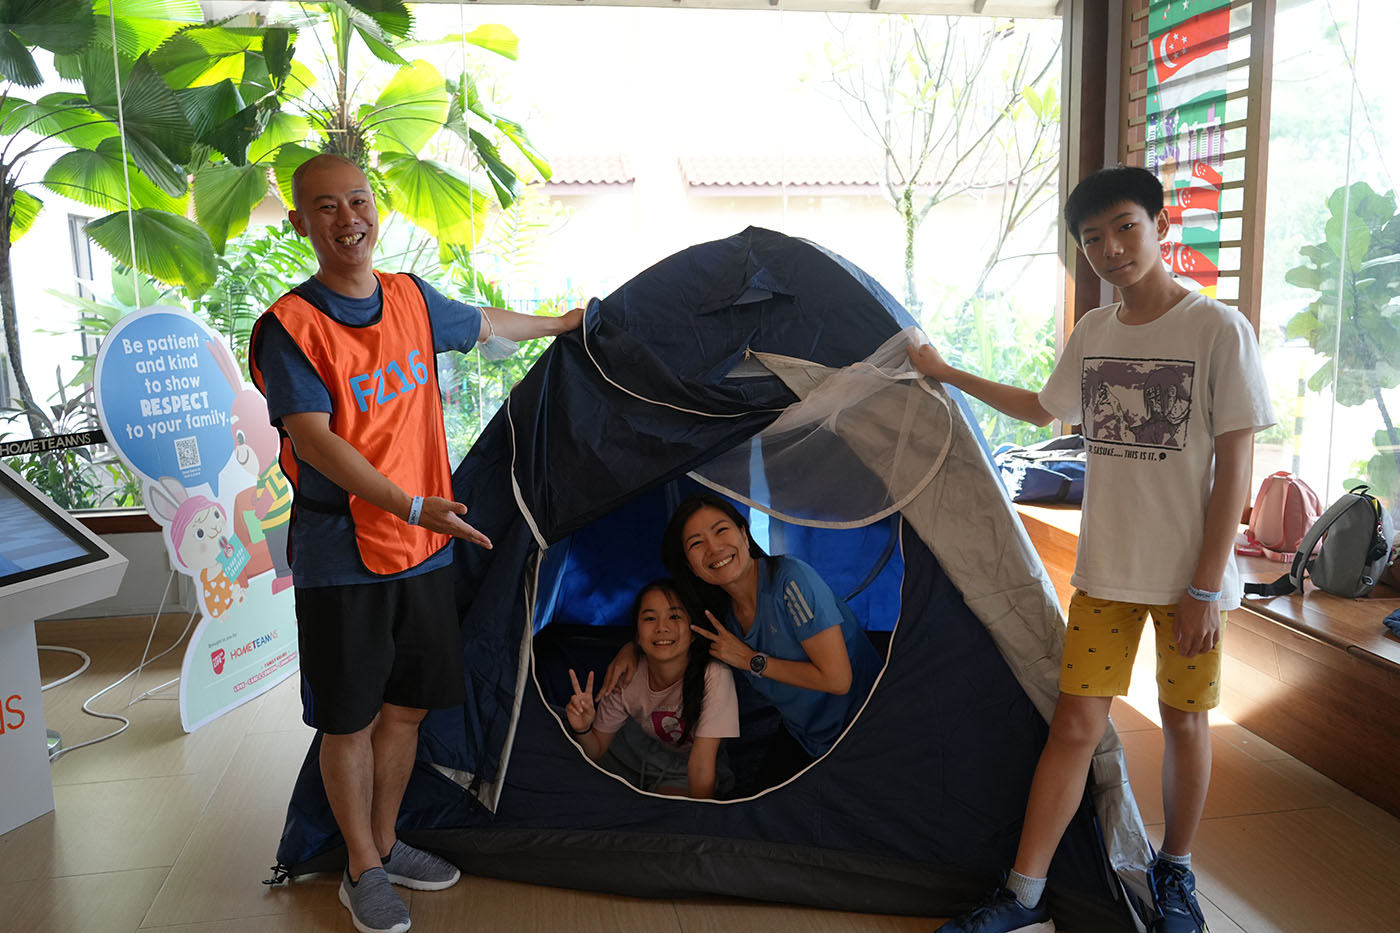 Participants completed a tent-building challenge to earn bonus points.